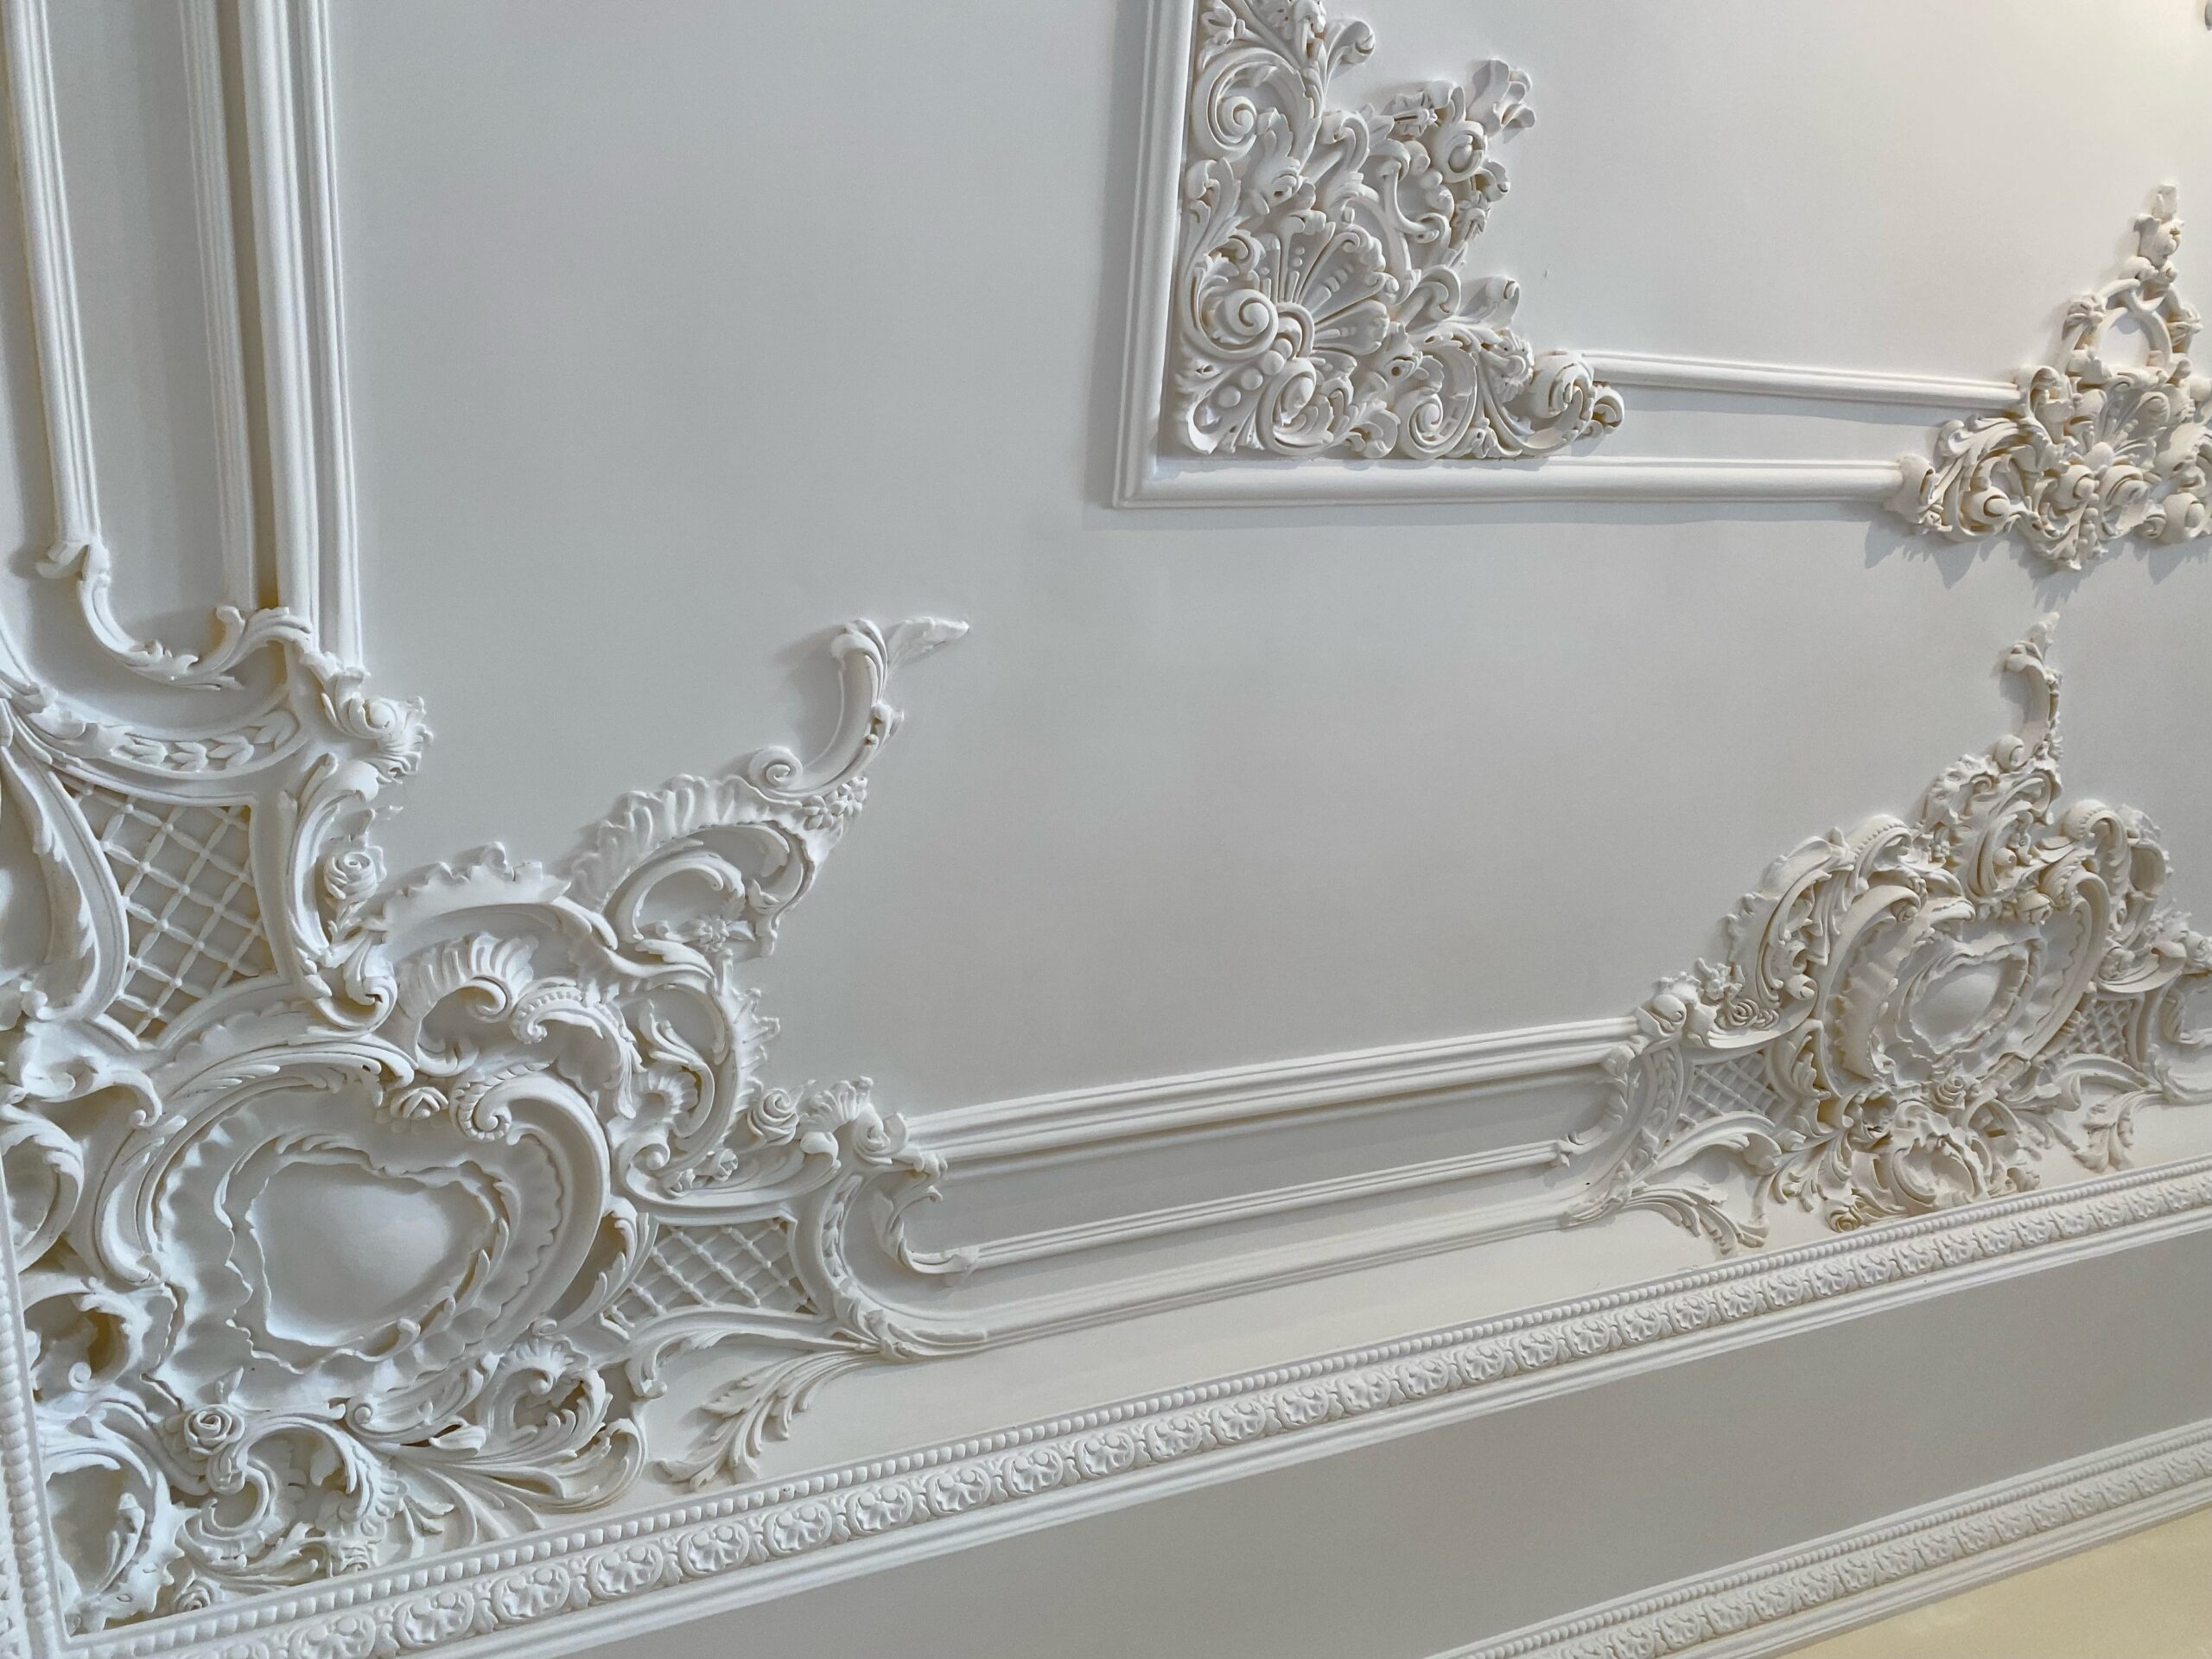 Crown molding with additional designs on the ceiling.